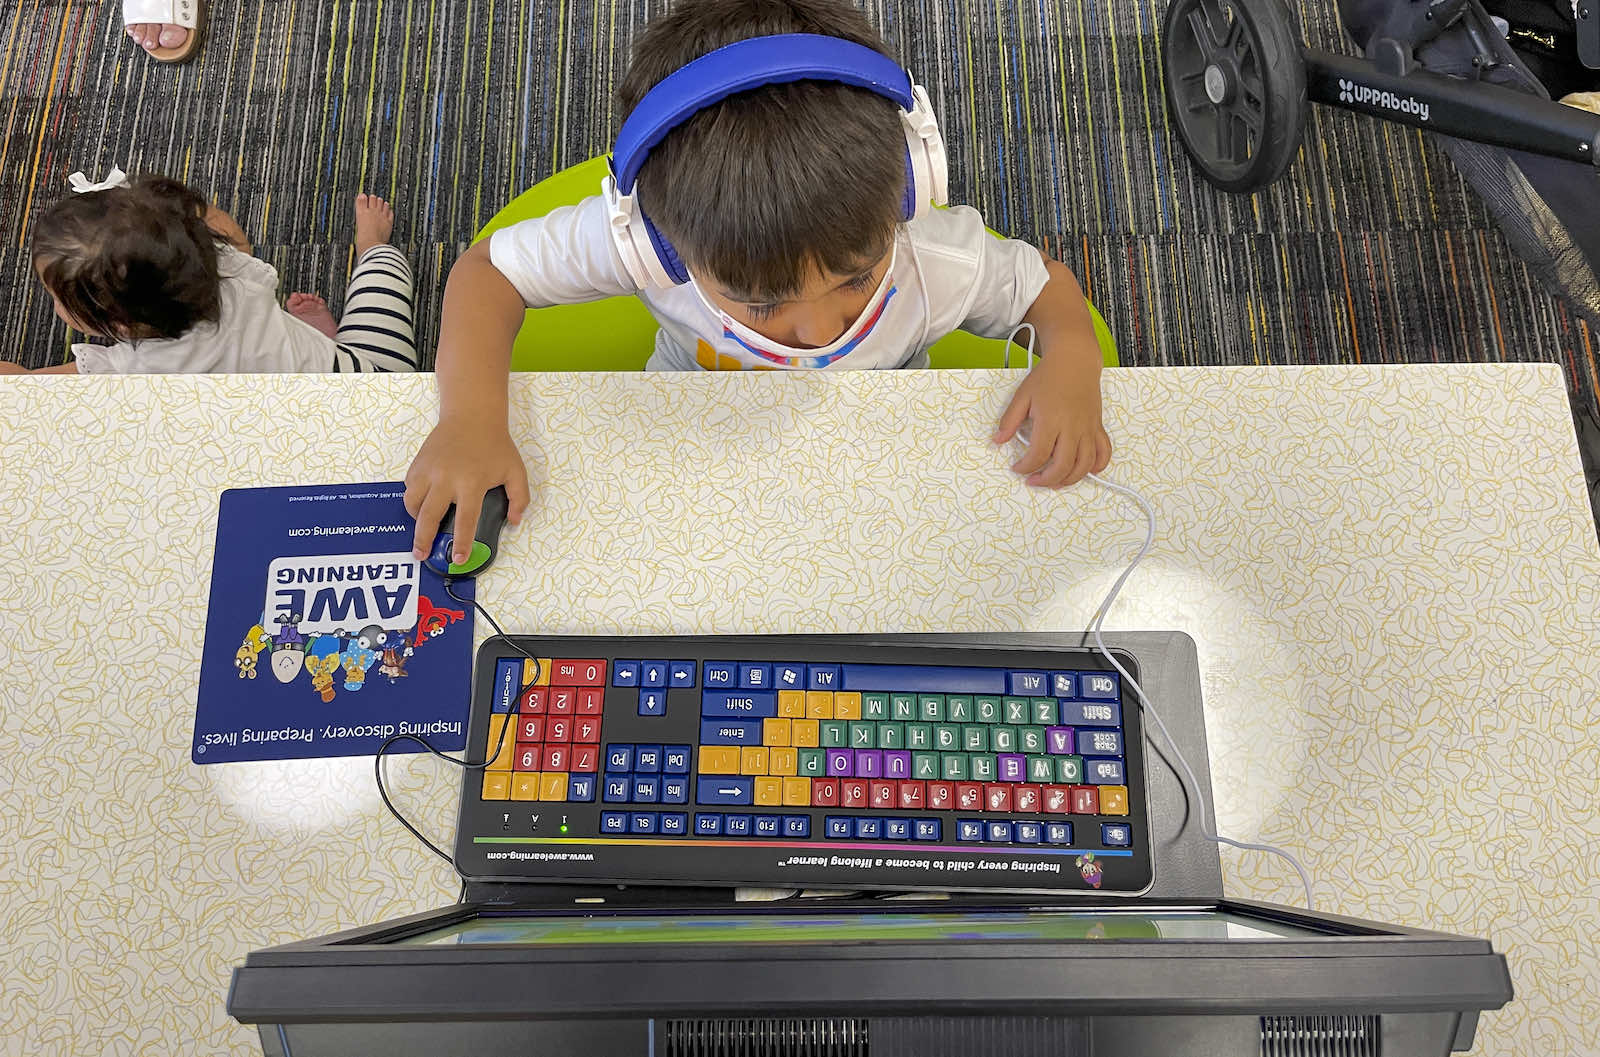 Child playing an educational computer game